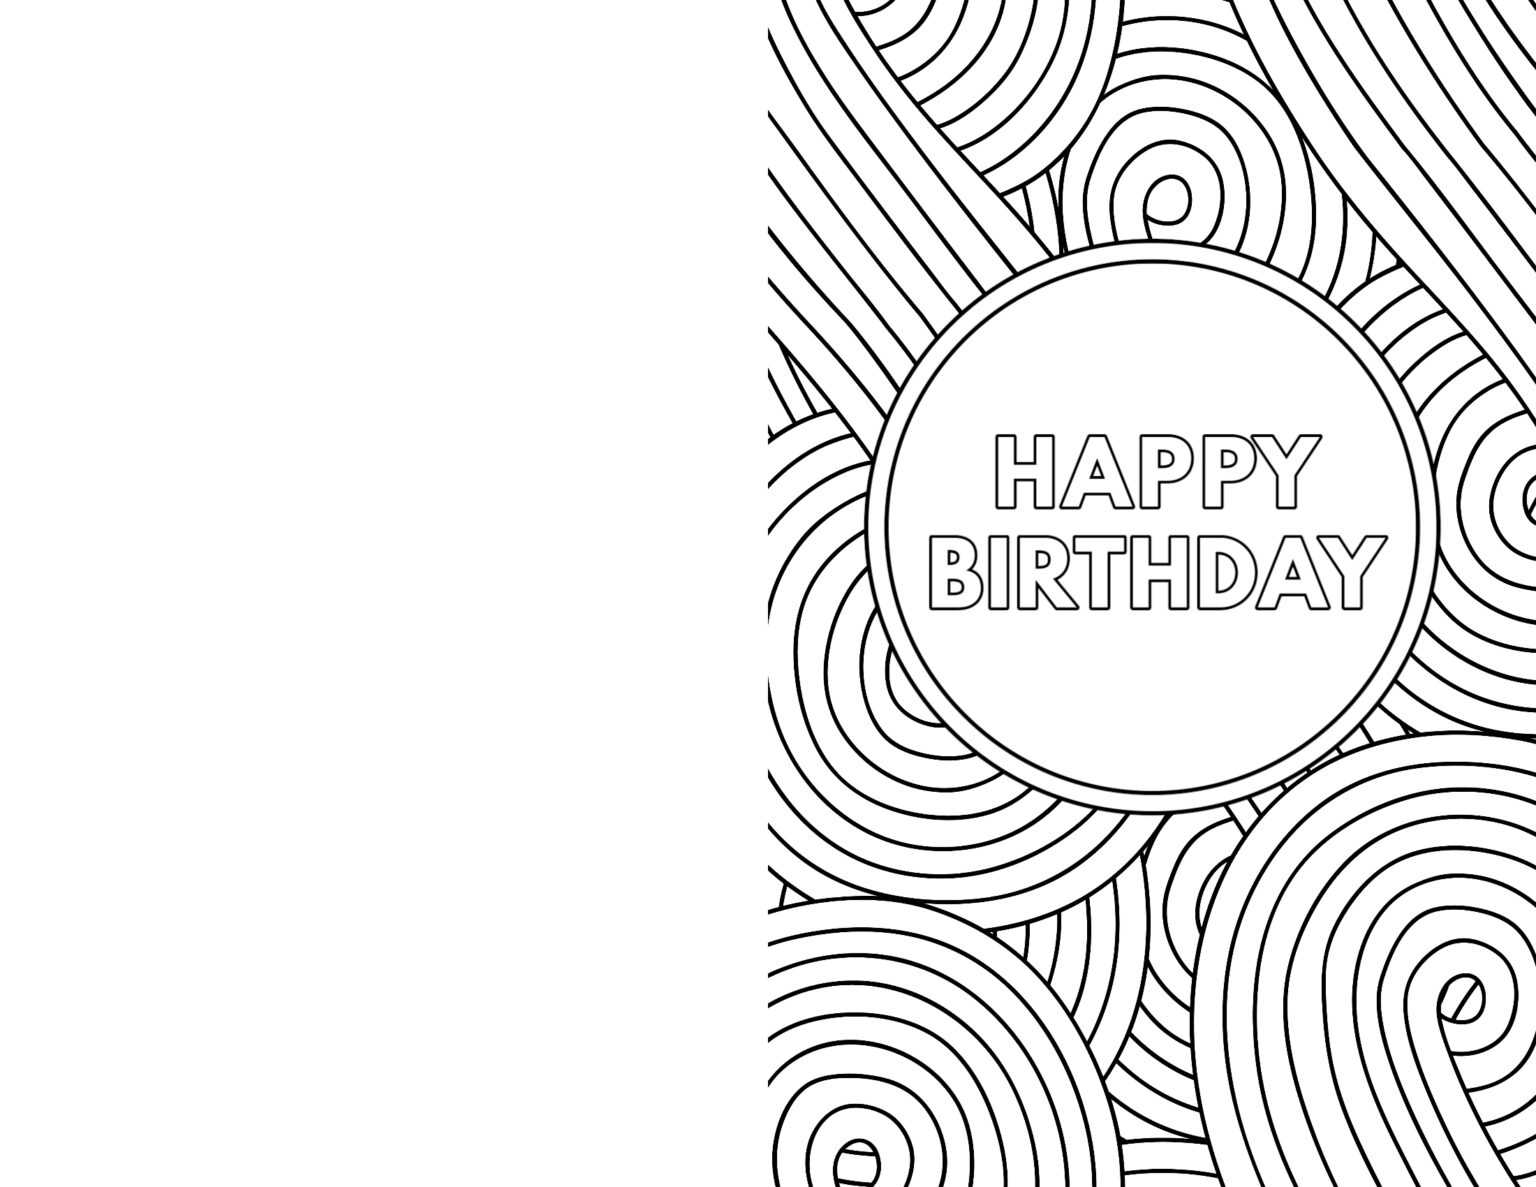 foldable-printable-birthday-cards-for-kids-in-foldable-birthday-card